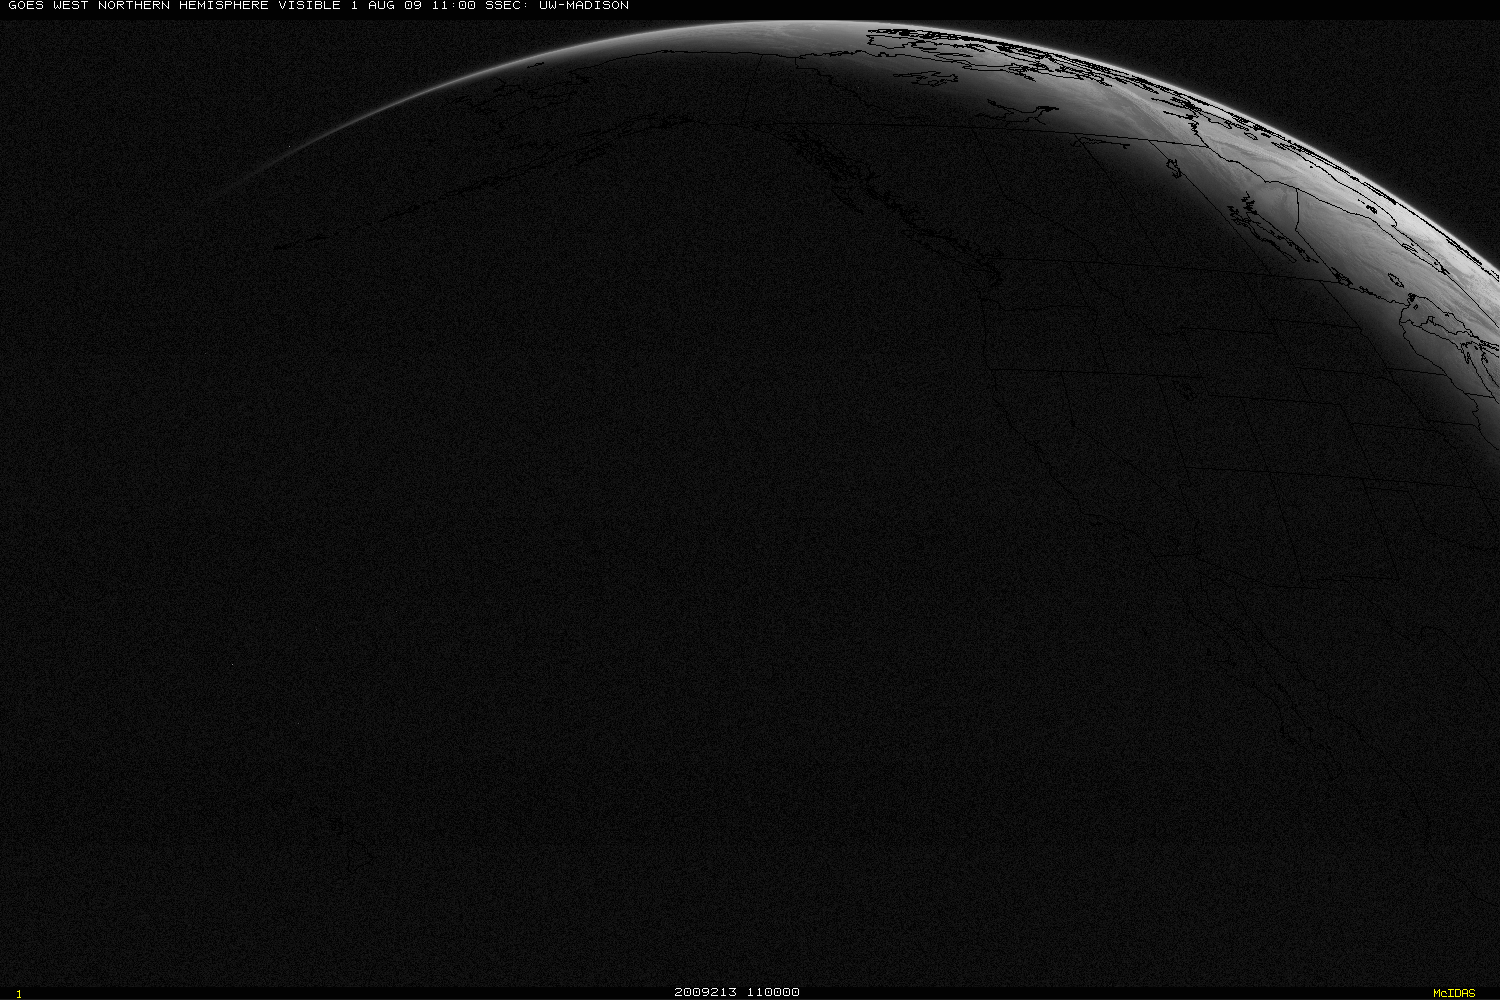 GOES-11 visible images